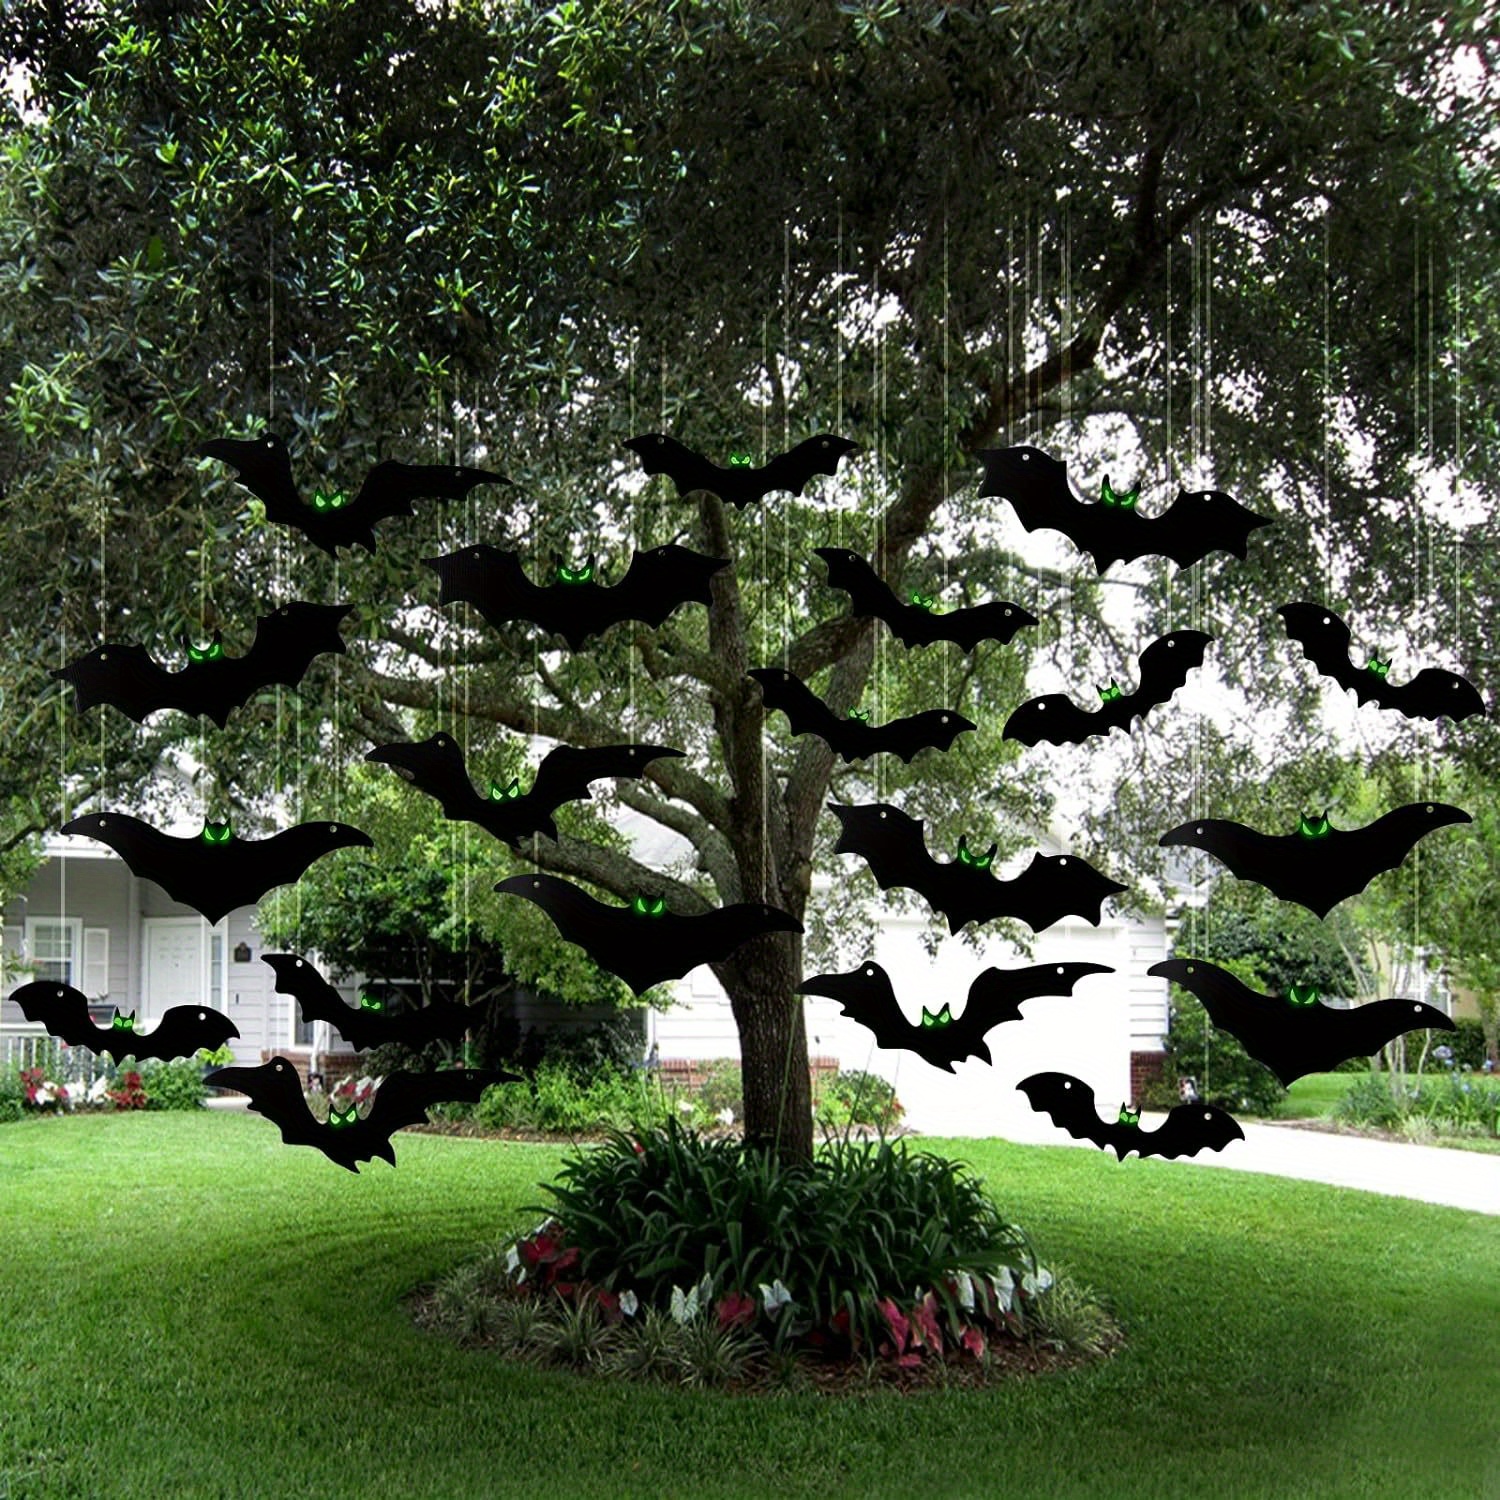 

20pcs Halloween Hanging Bats Decorations Outdoor - Plastic Flying Bats With Glowing Eyes For Front Door Yard Tree Halloween Hanging Decorations Outside